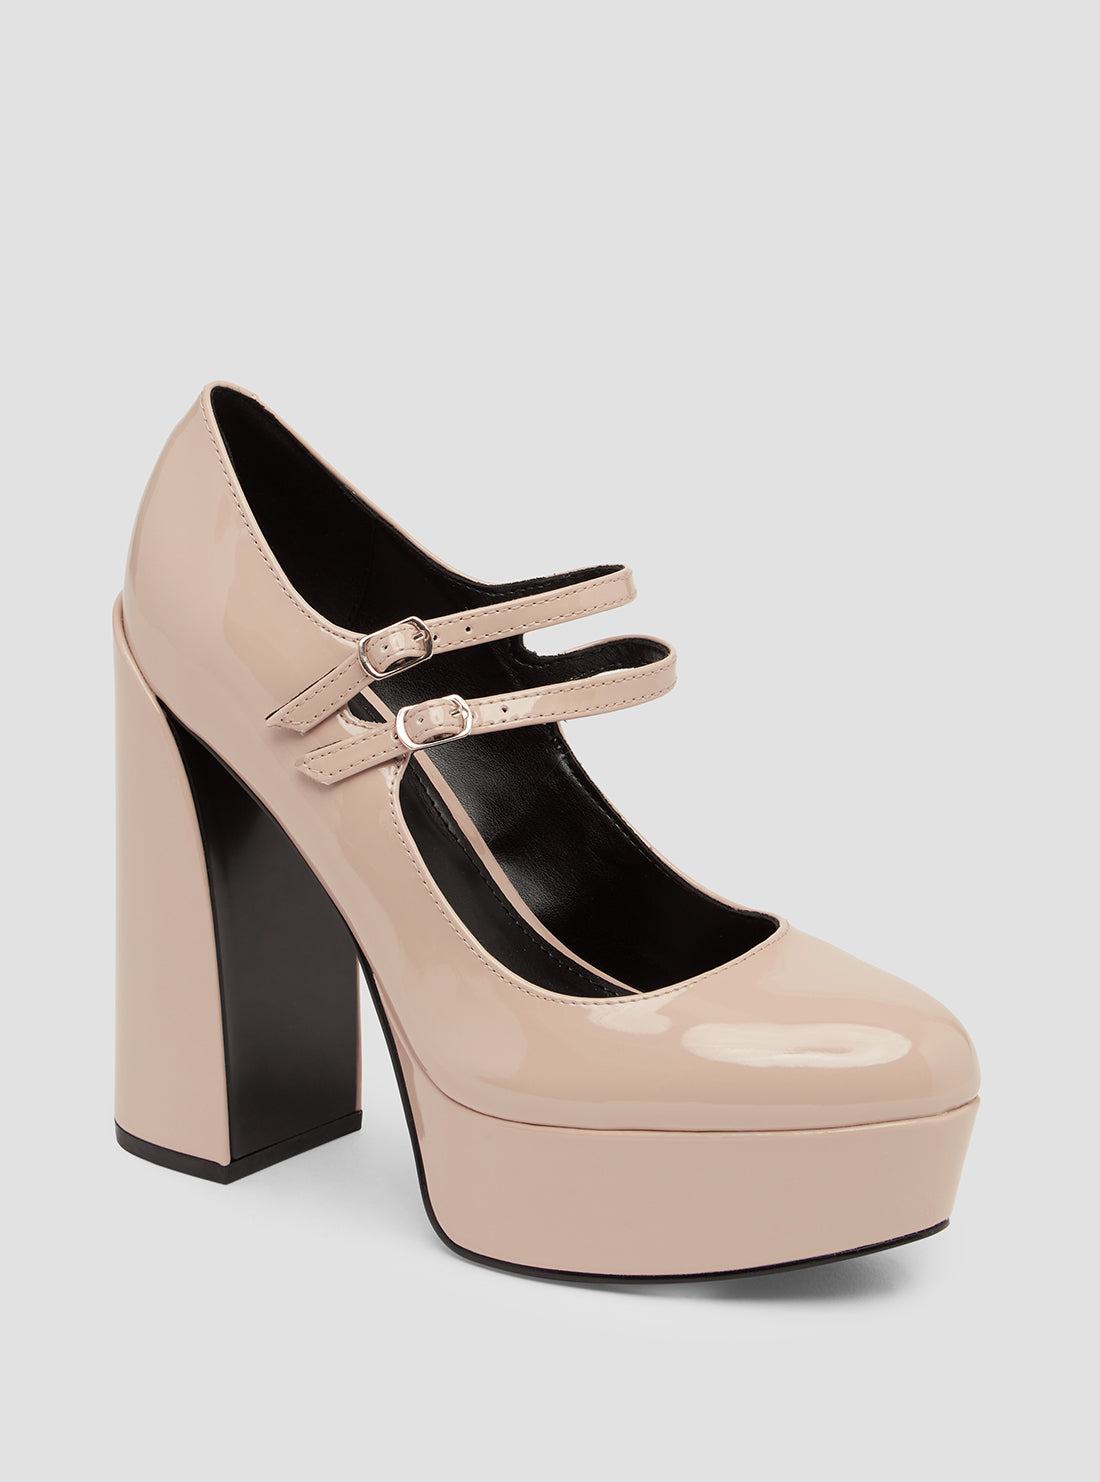 GUESS Women's Nude Patent Callyna Heels CALLYNA Front View